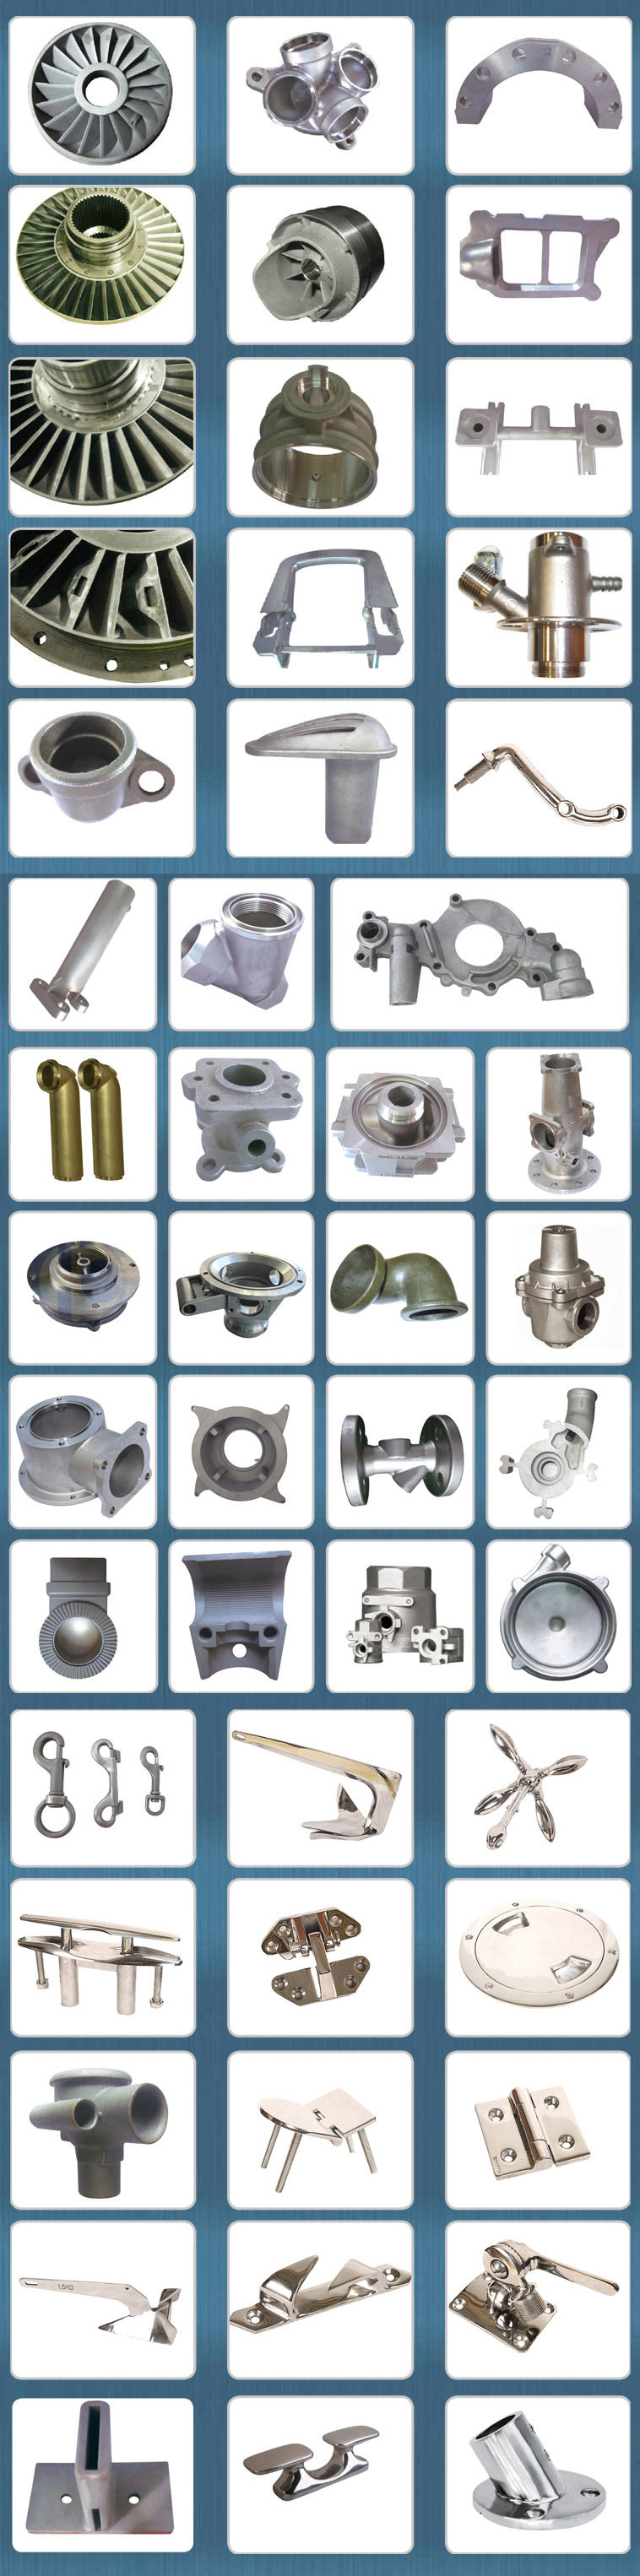 Investment Casting Steel Casting Part